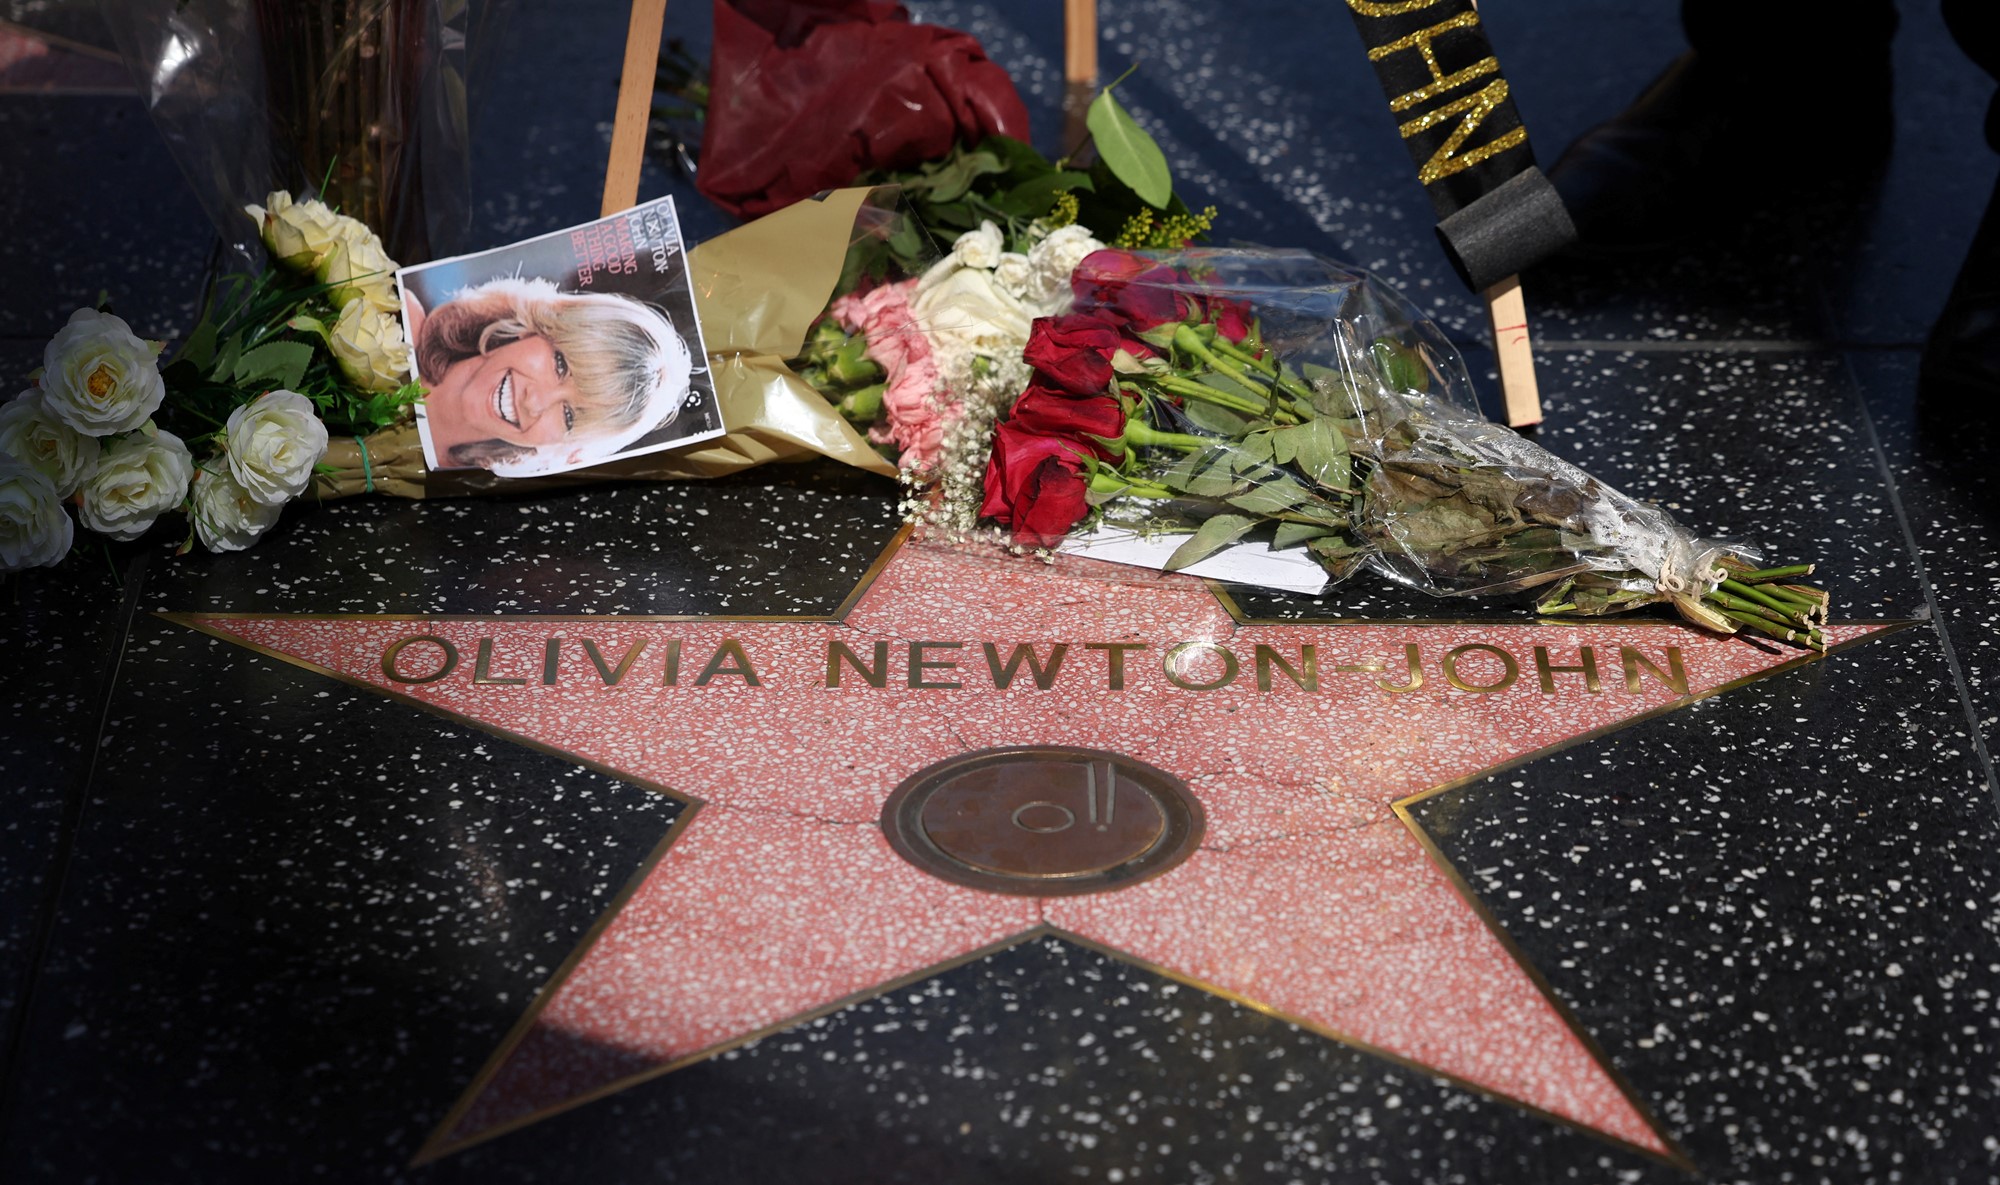 Flowers are left next to Olivia Newton-John's star on the walk of fame.